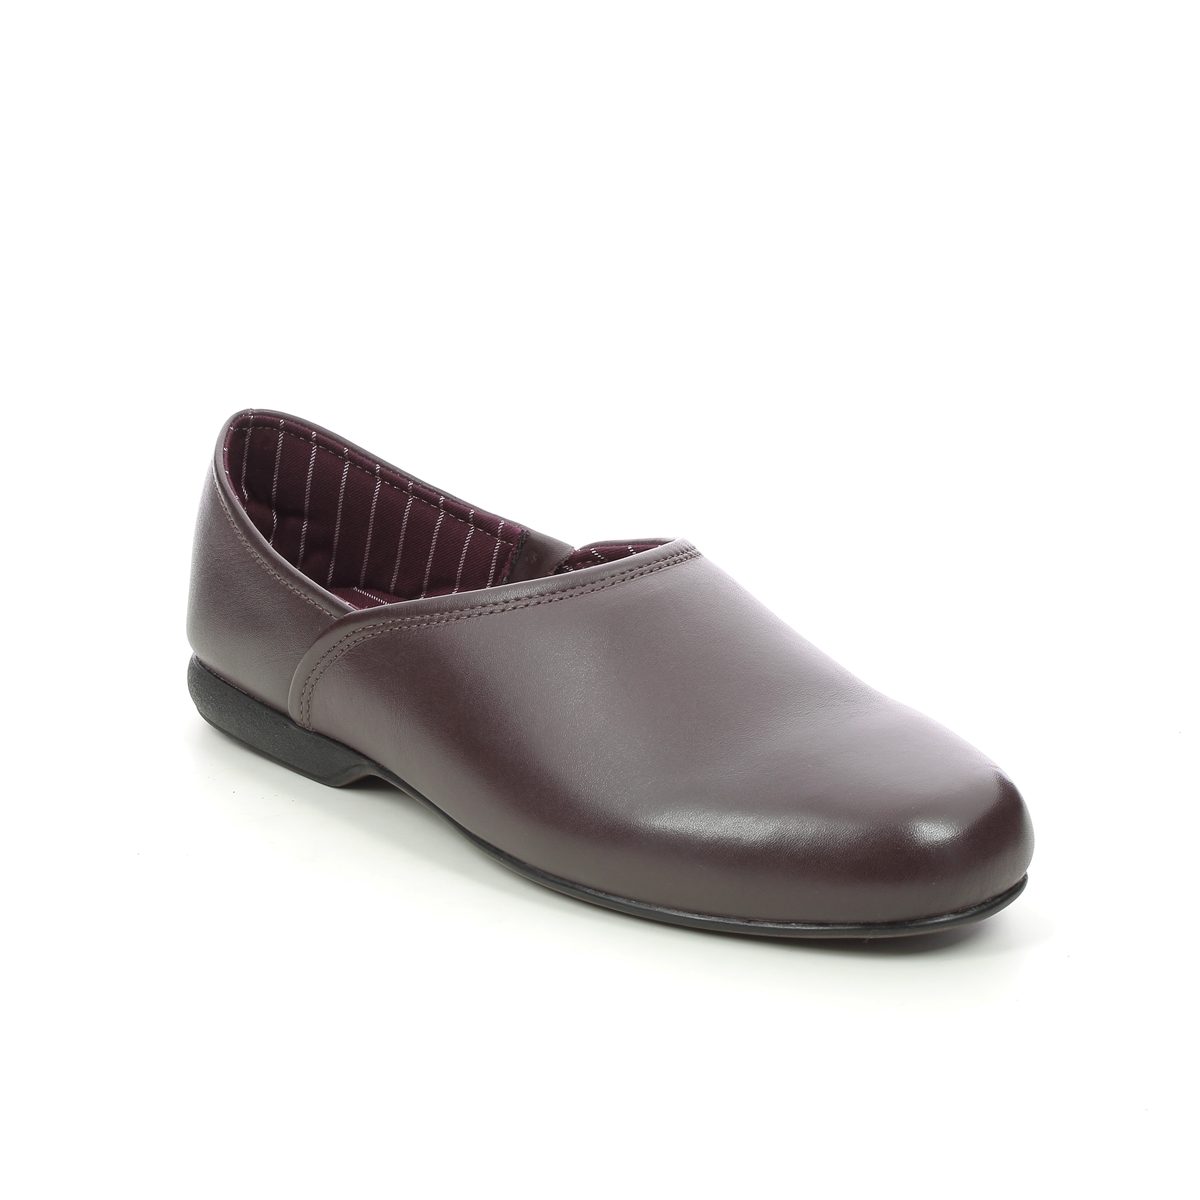 Clarks Harston Elite Burgundy Leather Mens Slippers 447217G In Size 11 In Plain Burgundy Leather G Width Fitting